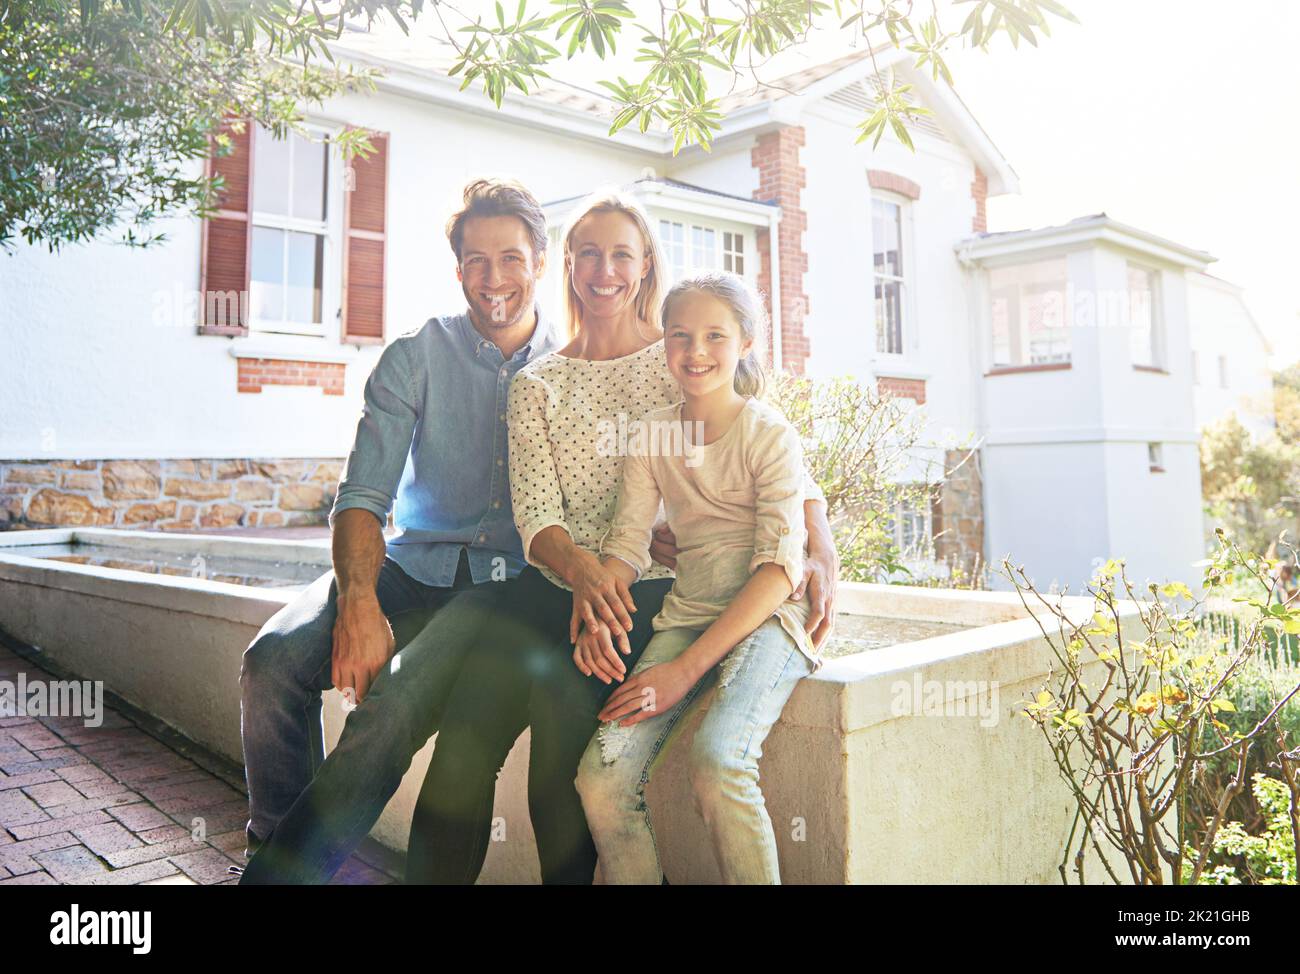 Lifes treasures are people not things. Portrait of a family of three spending time together. Stock Photo